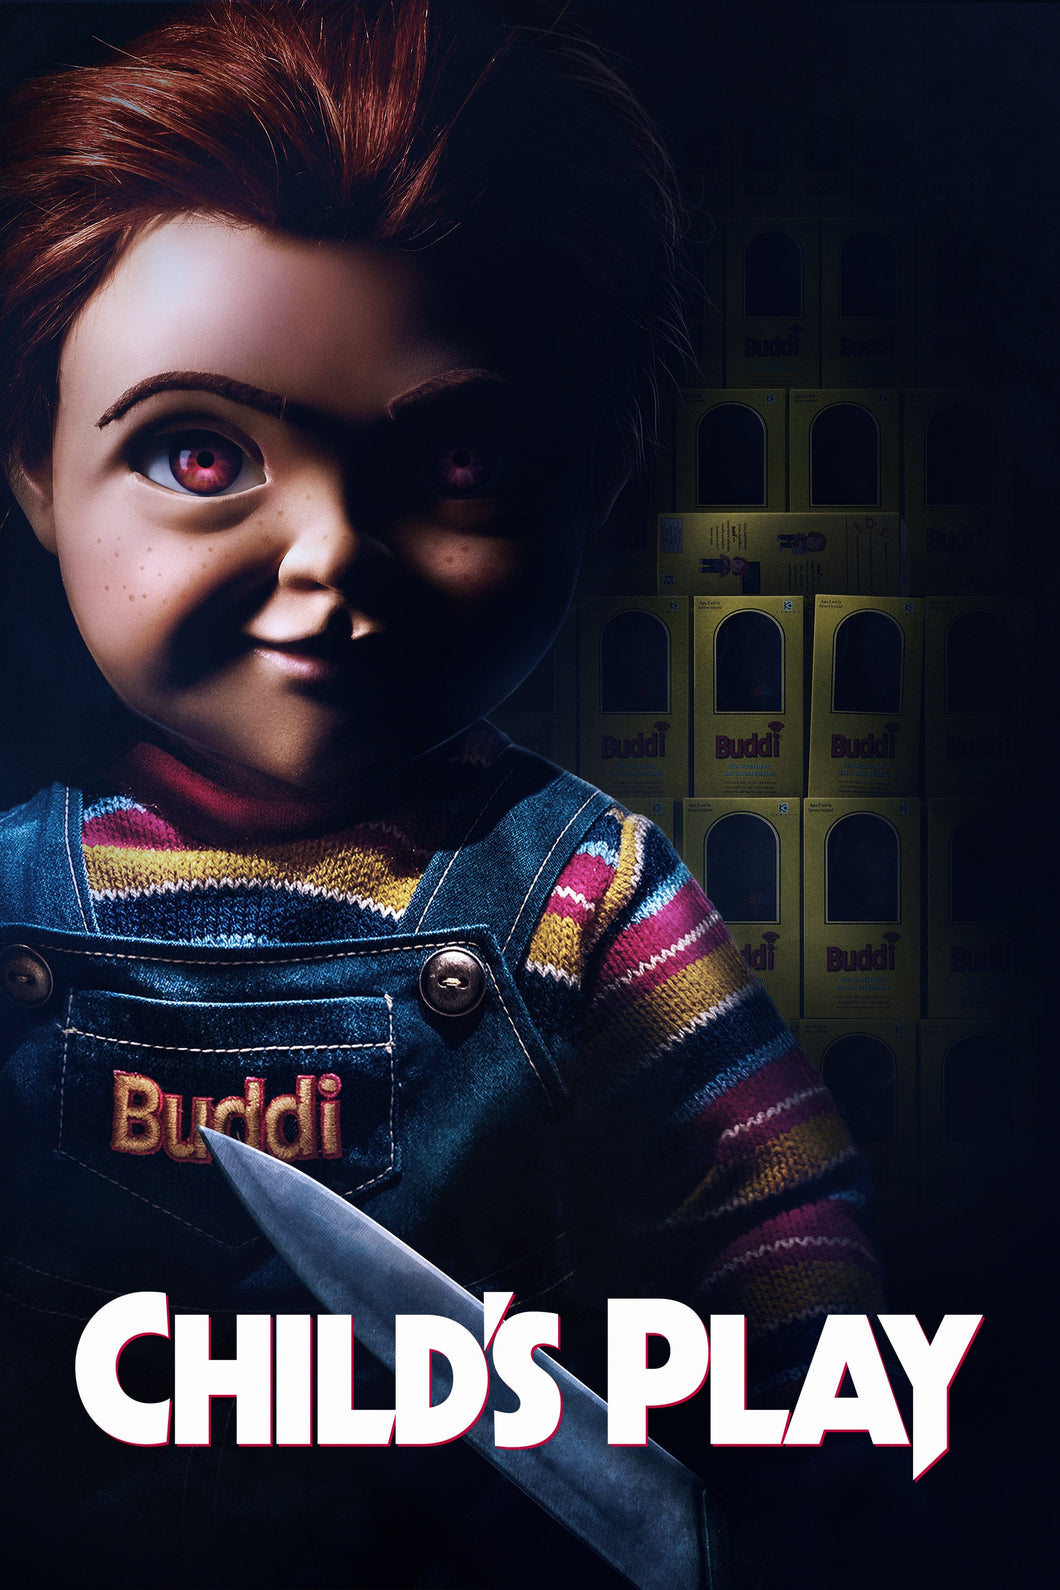 Childs Play Movie Poster High Quality Glossy Paper A1 A2 A3 A4 A3 Framed or Unframed!!!